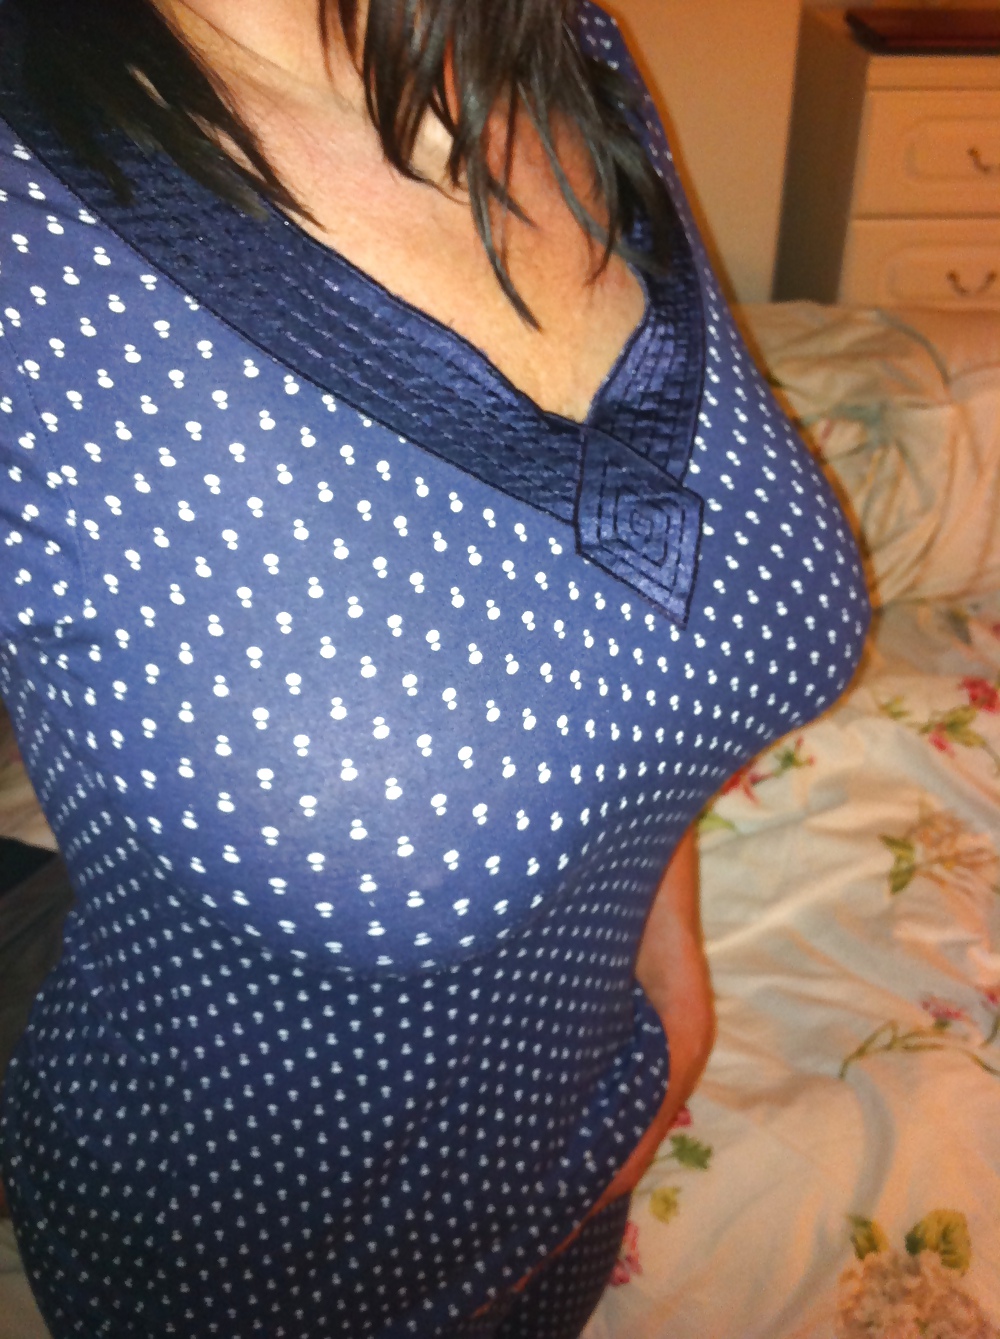 Sinful Gf,s horny spacious titties ready for bed